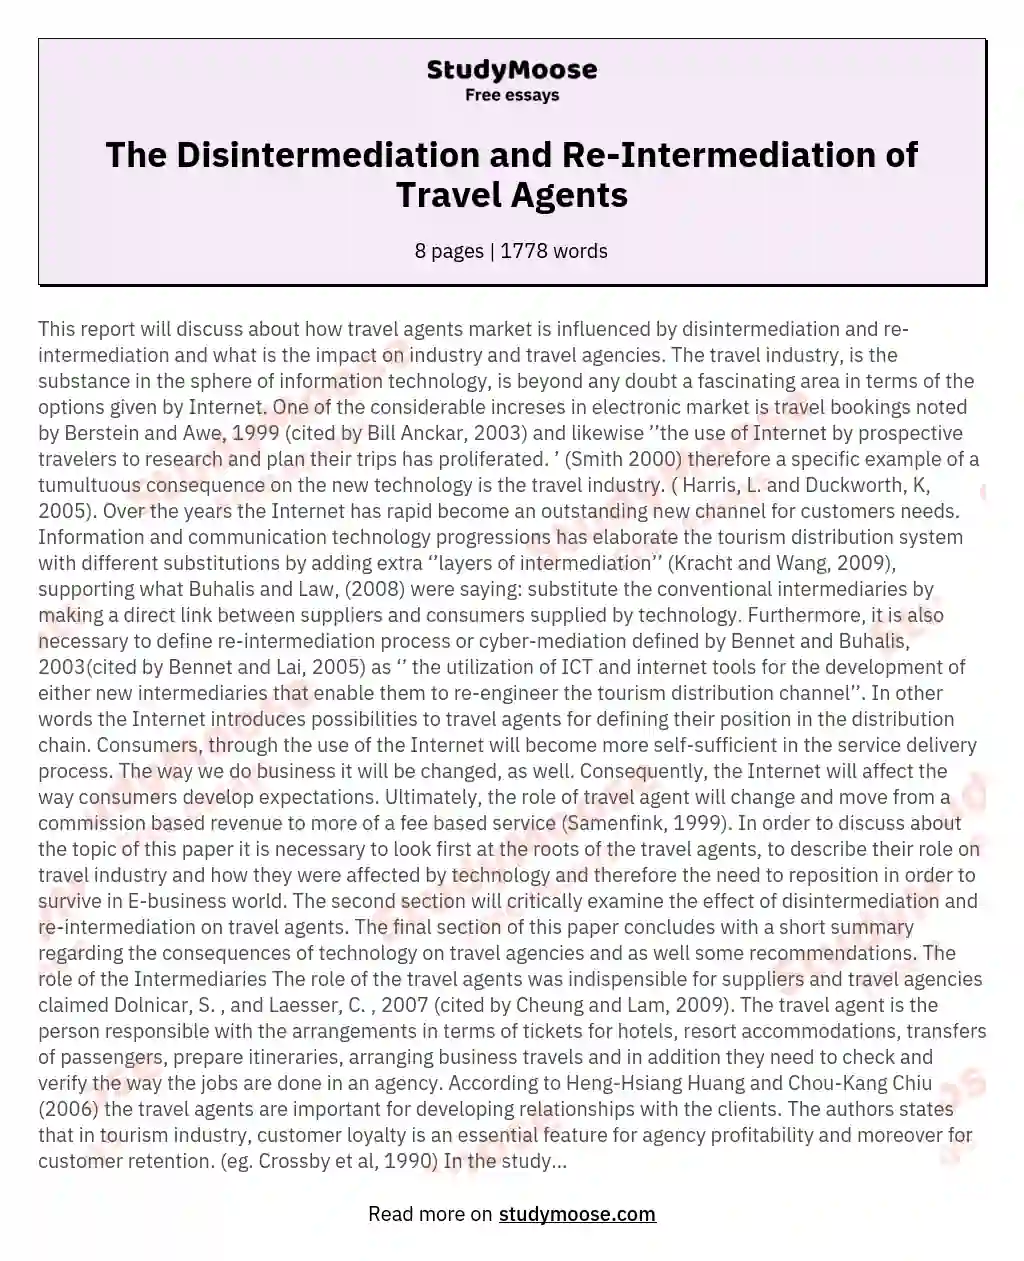 The Disintermediation and Re-Intermediation of Travel Agents essay